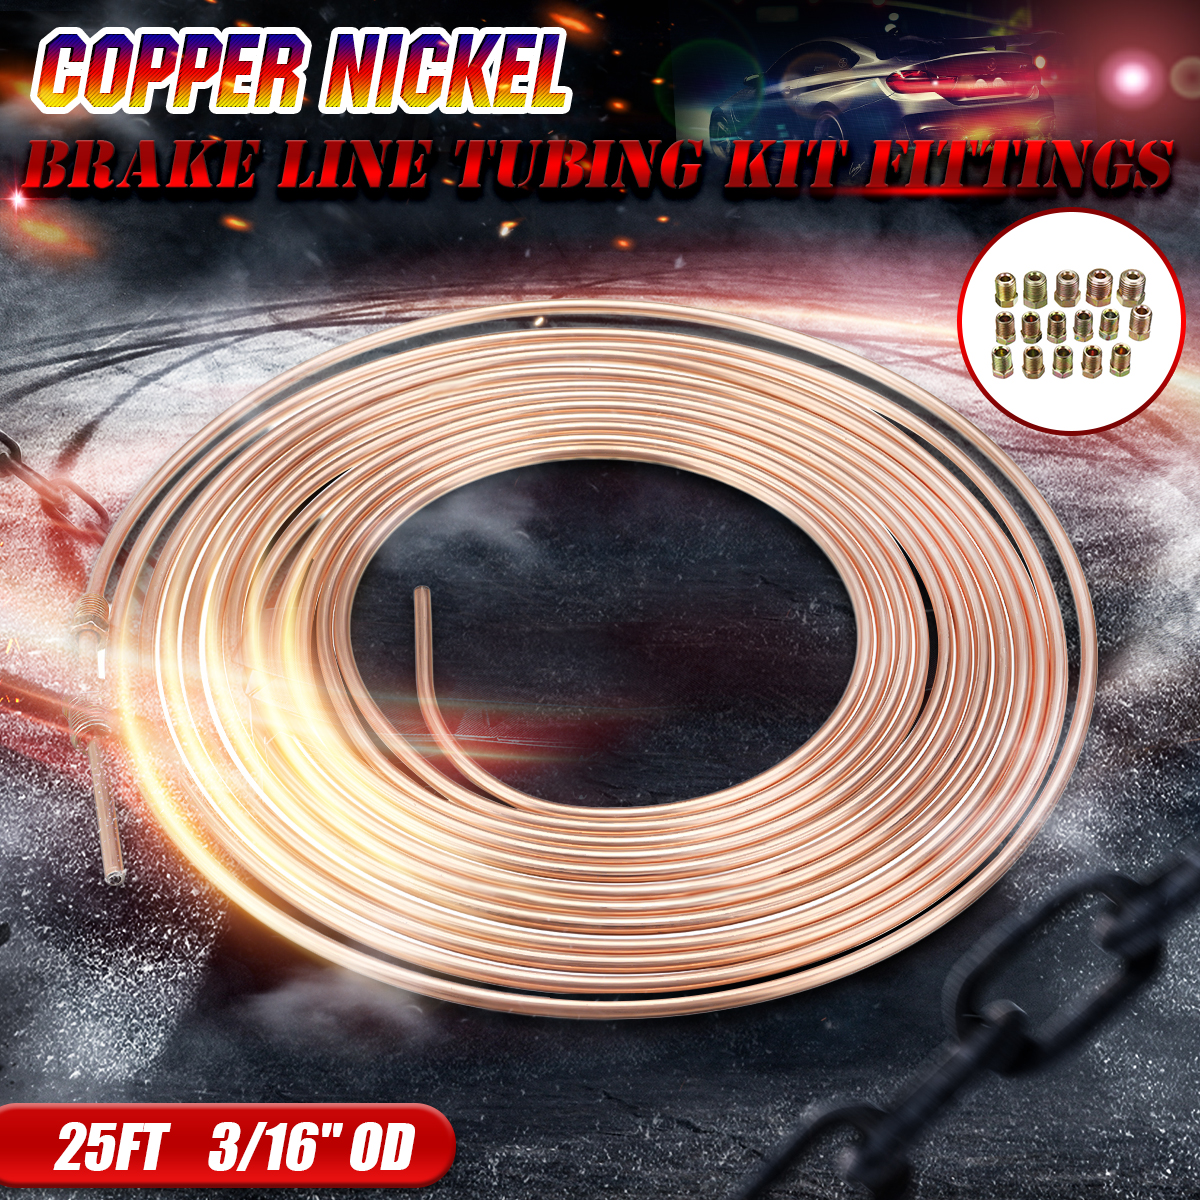 Universal-25Ft-Copper-Nickel-Brake-Line-Tubing-Kit-316quot-OD-with-15Pcs-Nuts-1586631